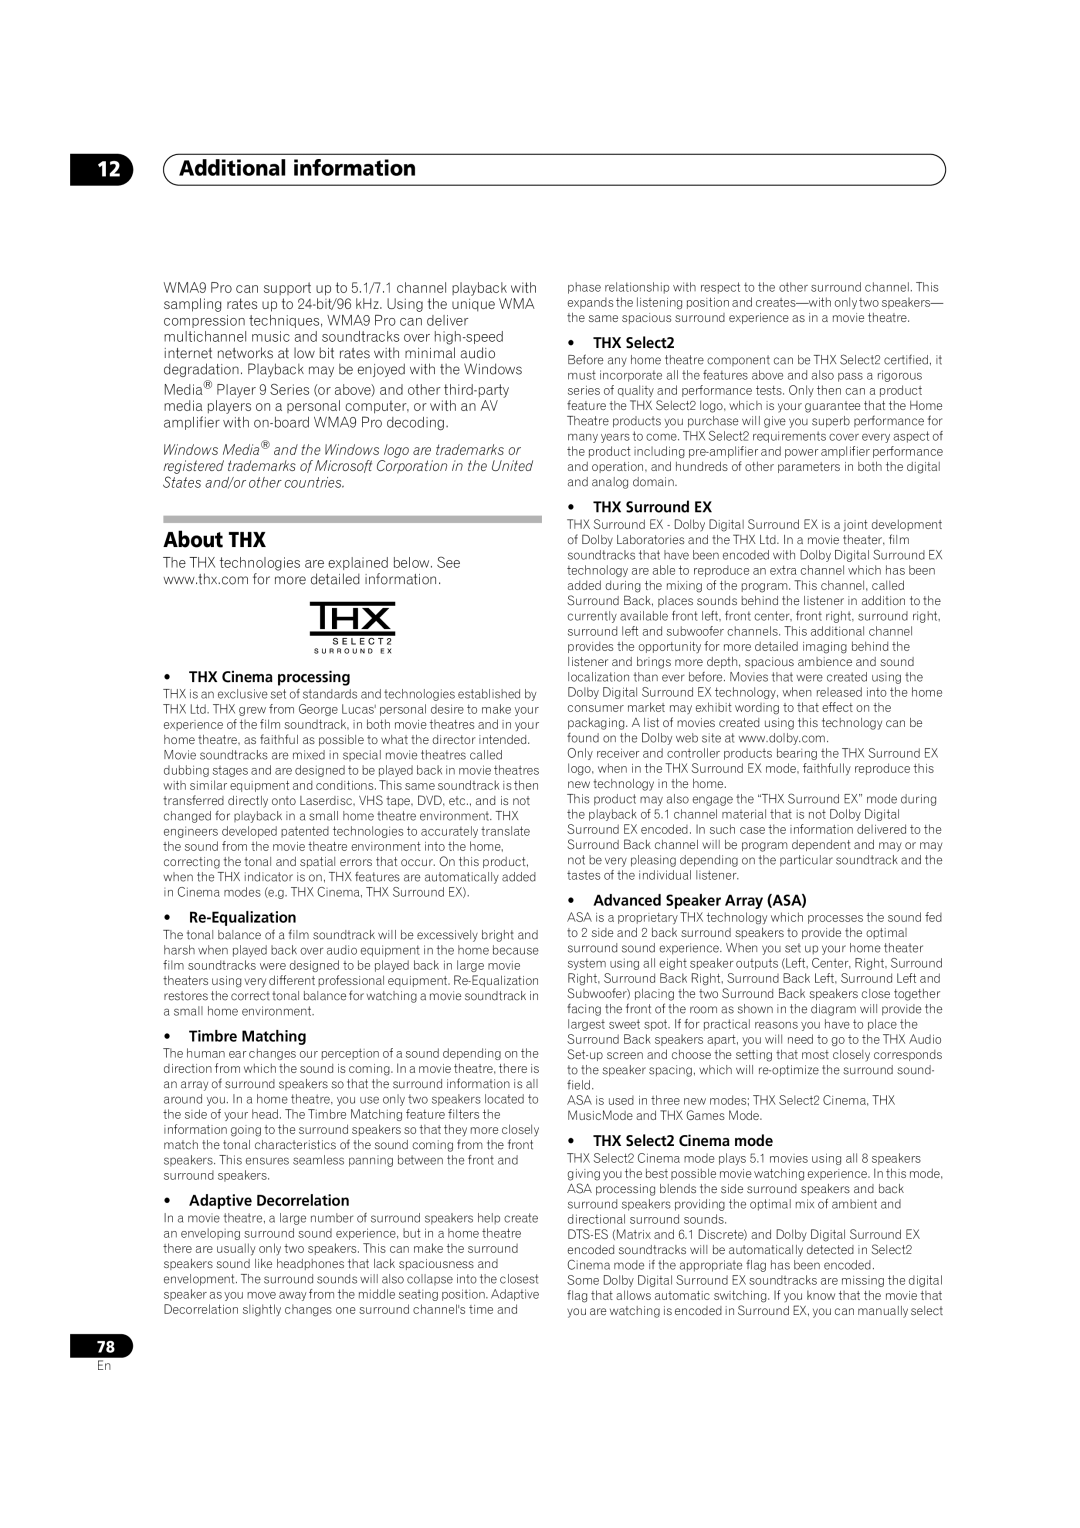 Classe Audio VSX-81TXV manual About THX, 12Additional information, THX Cinema processing, Re-Equalization, Timbre Matching 